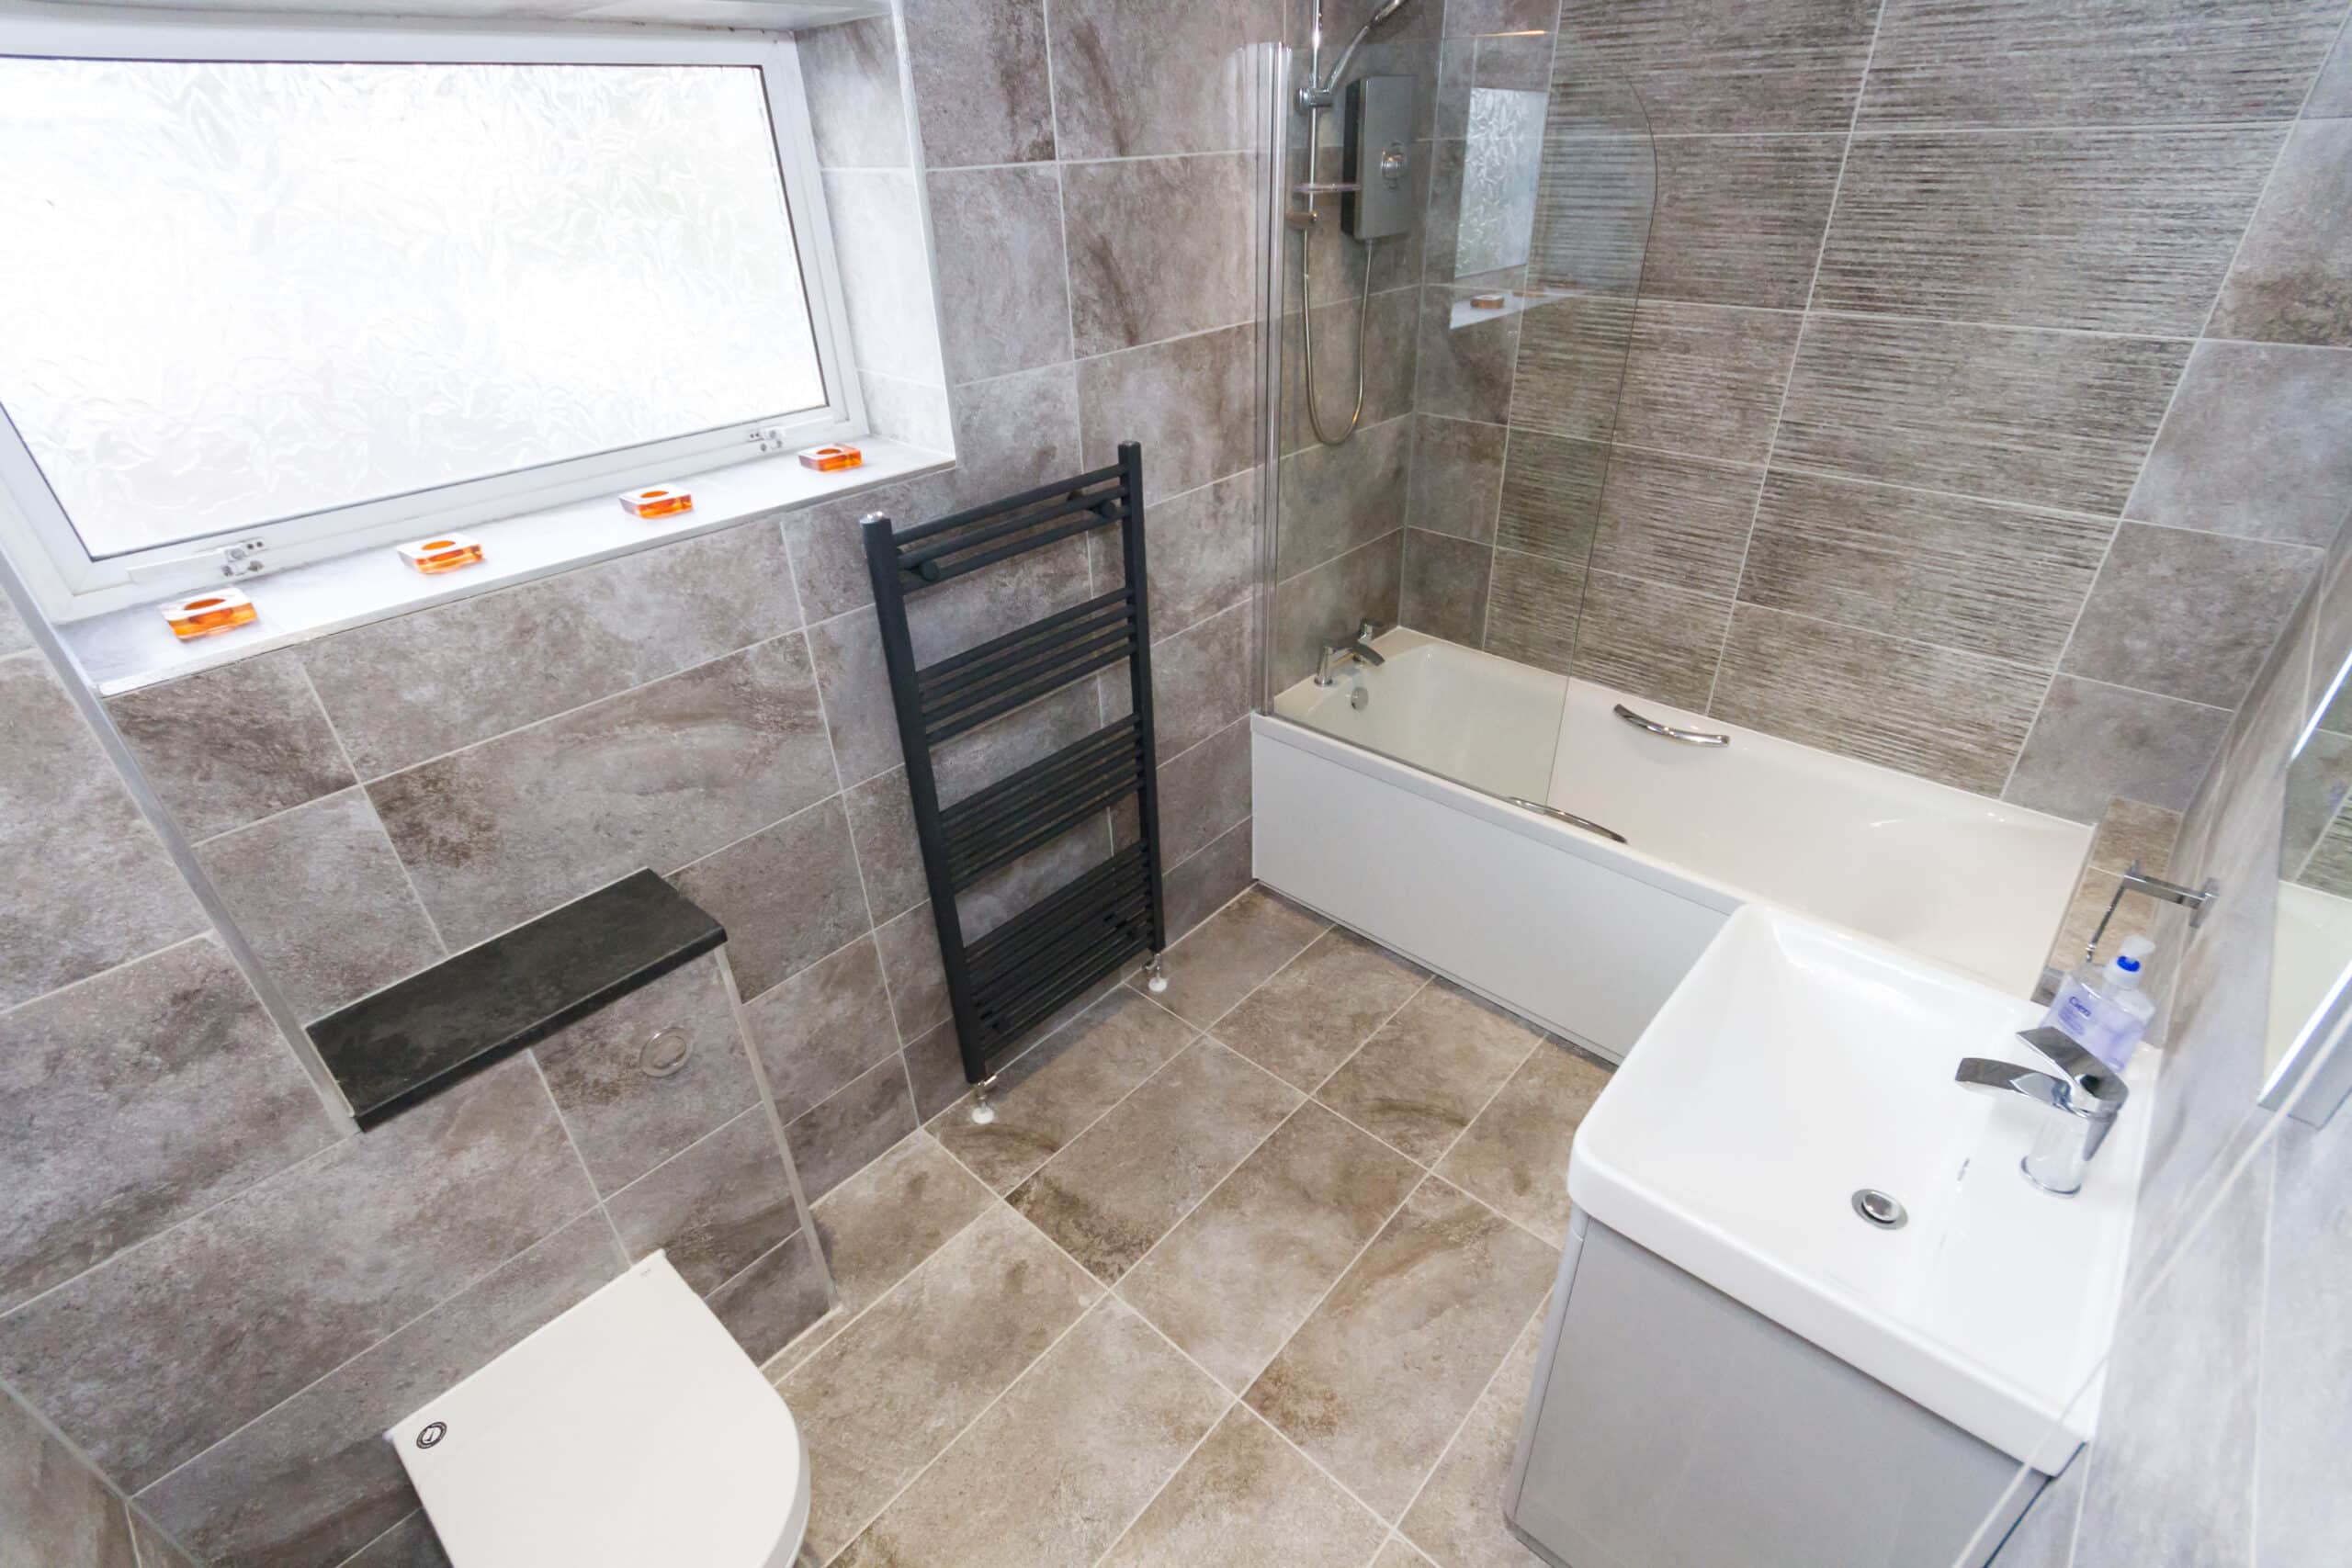 You are currently viewing Choosing the Right Fit: Vital Questions for Hiring Bathroom Fitters